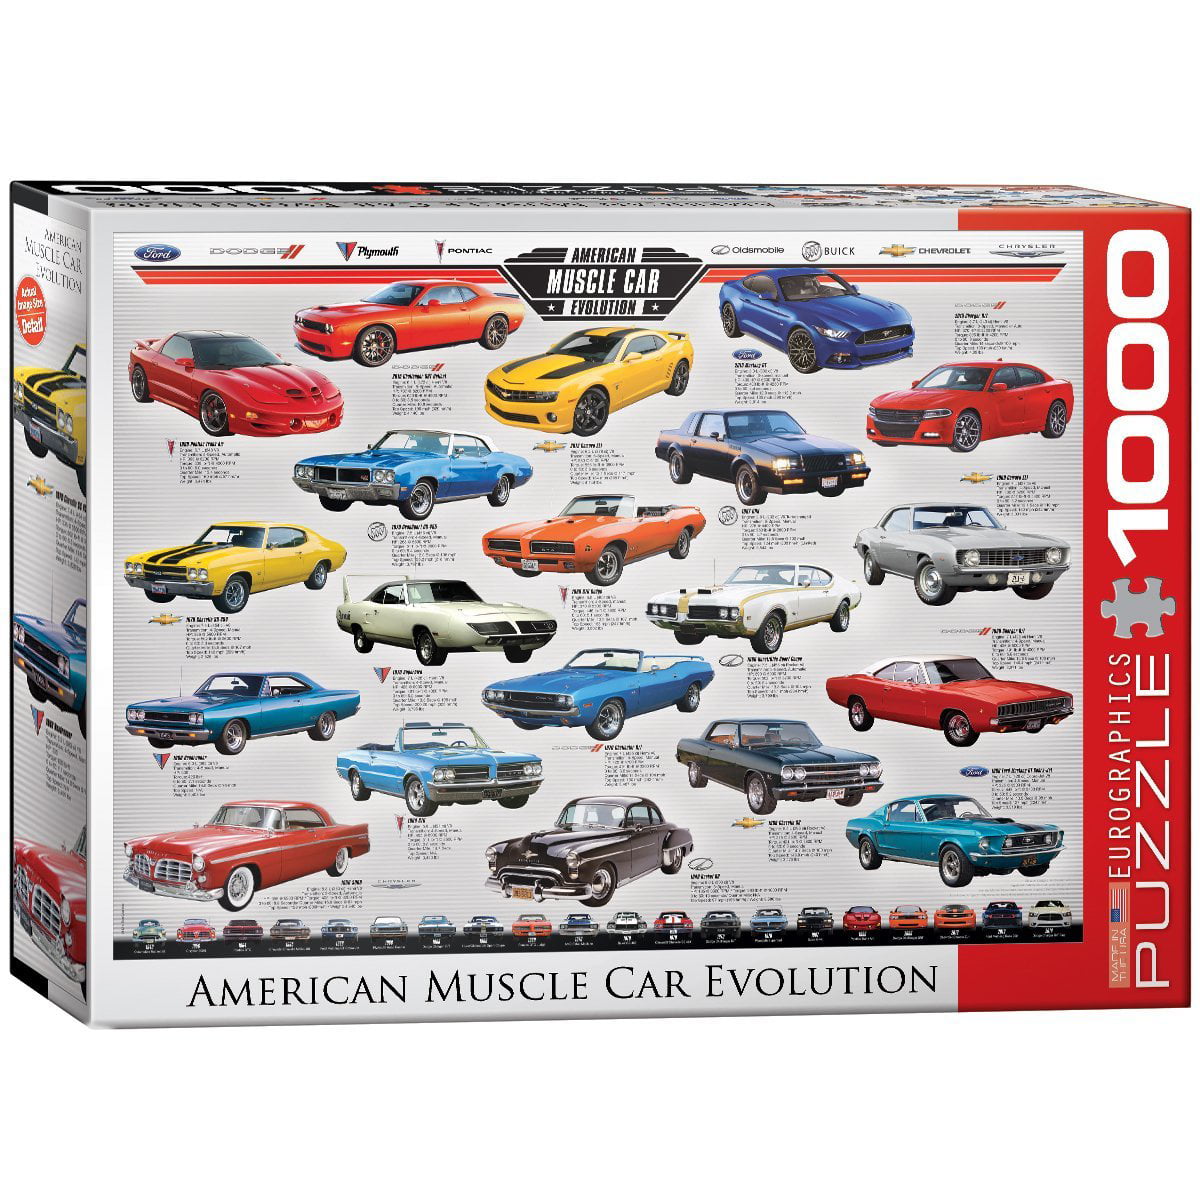 New American Muscle Car Evolution 1,000 piece jigsaw puzzle